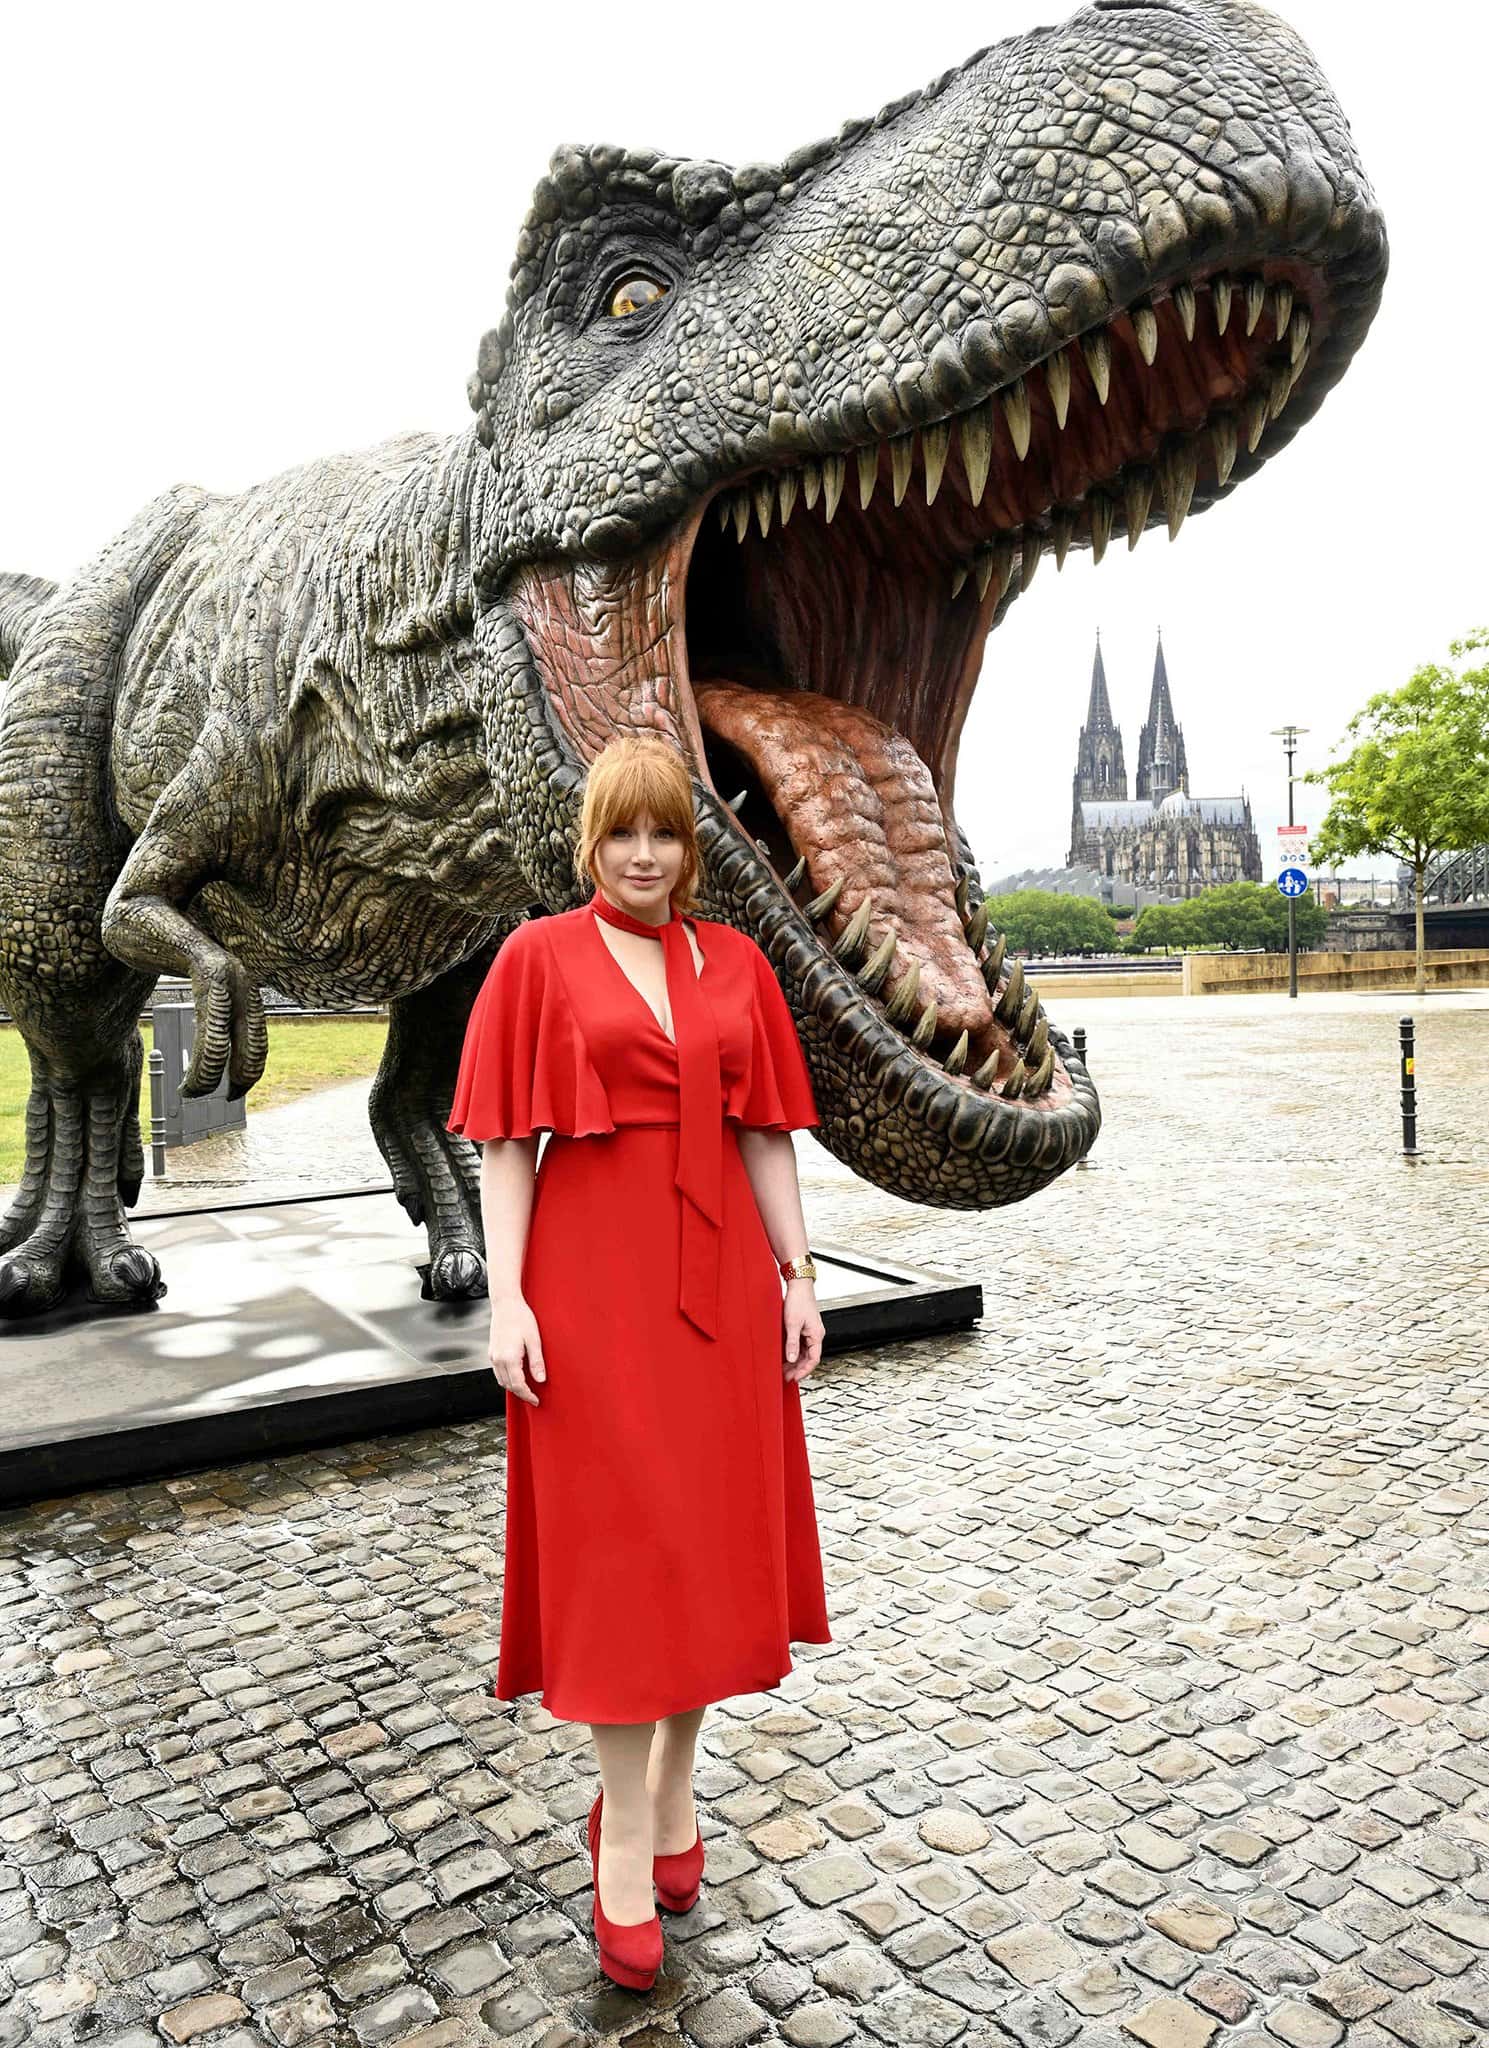 ryce Dallas Howard attends the photocall for Jurassic World: Dominion in a plunging red dress in Cologne, Germany on June 3, 2022